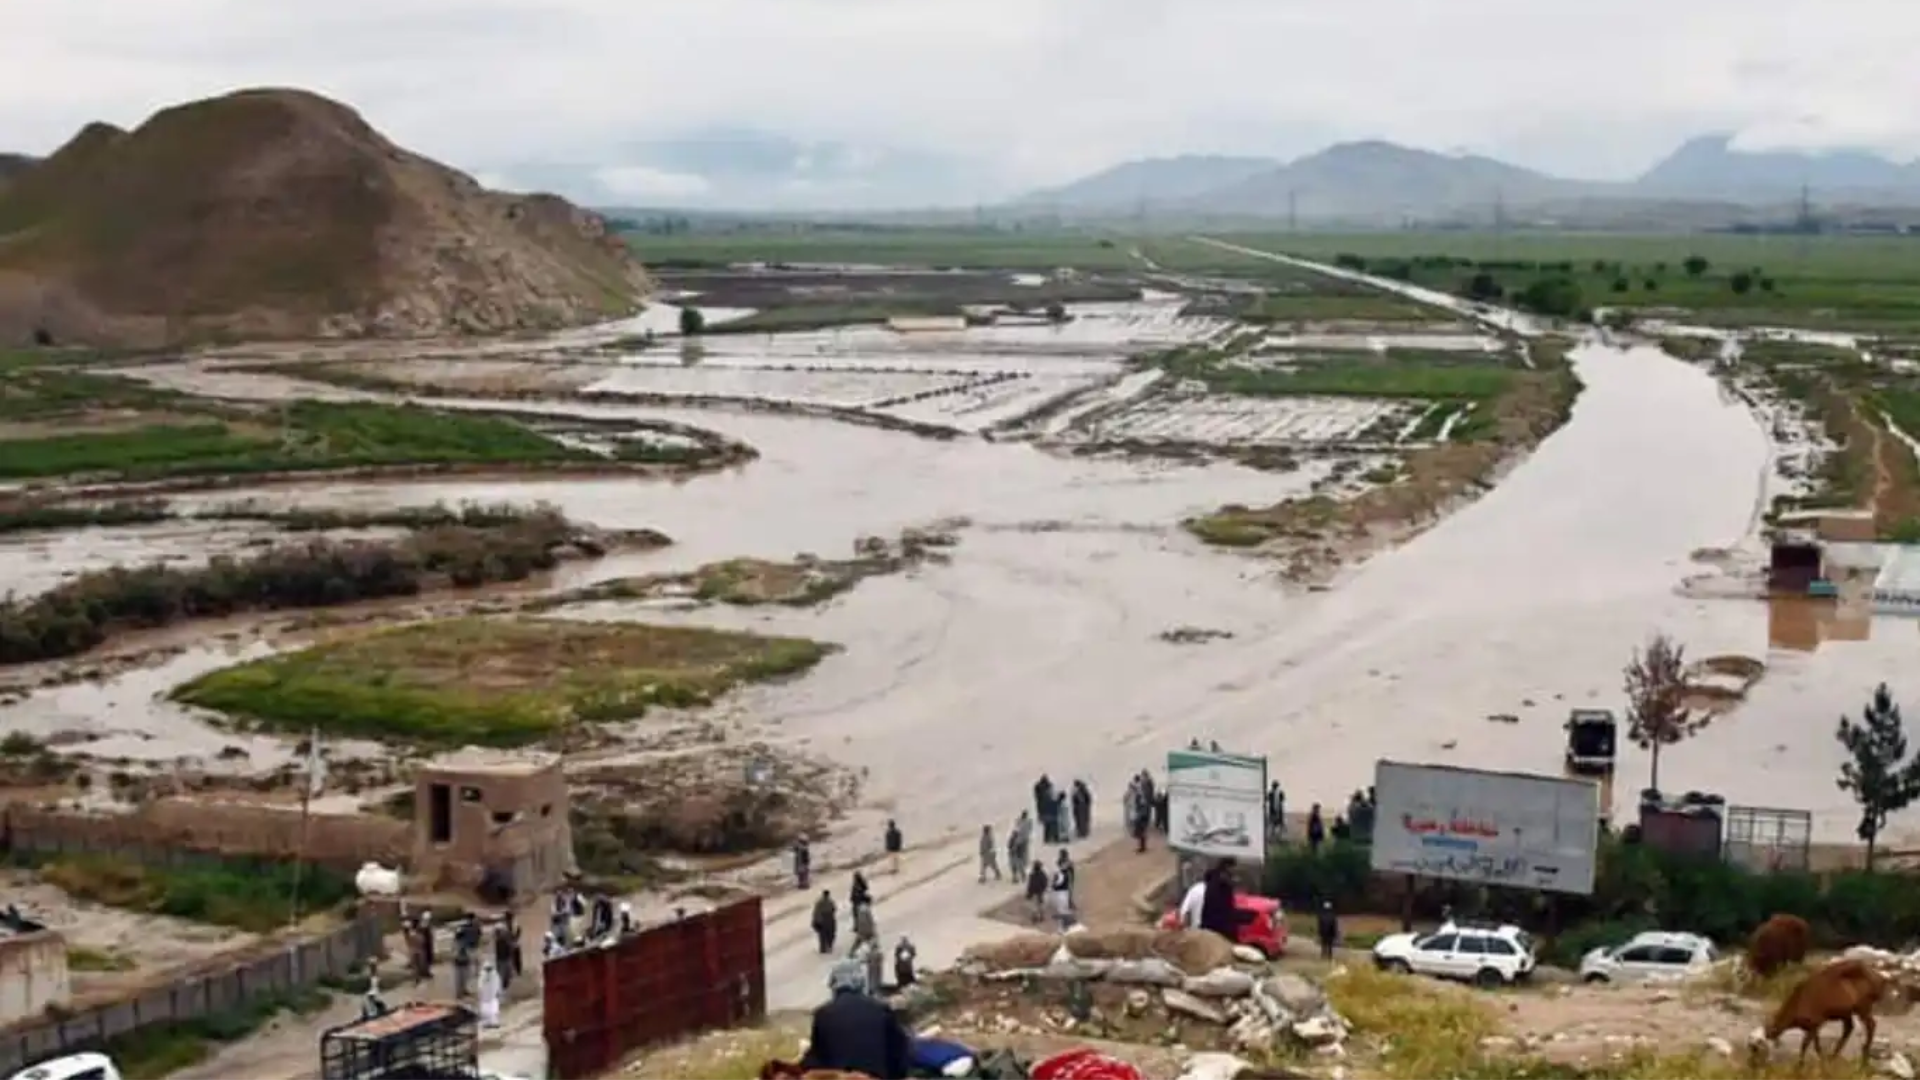 UN Agency Reports Death Toll Exceeds 300 In Afghanistan Flash Floods